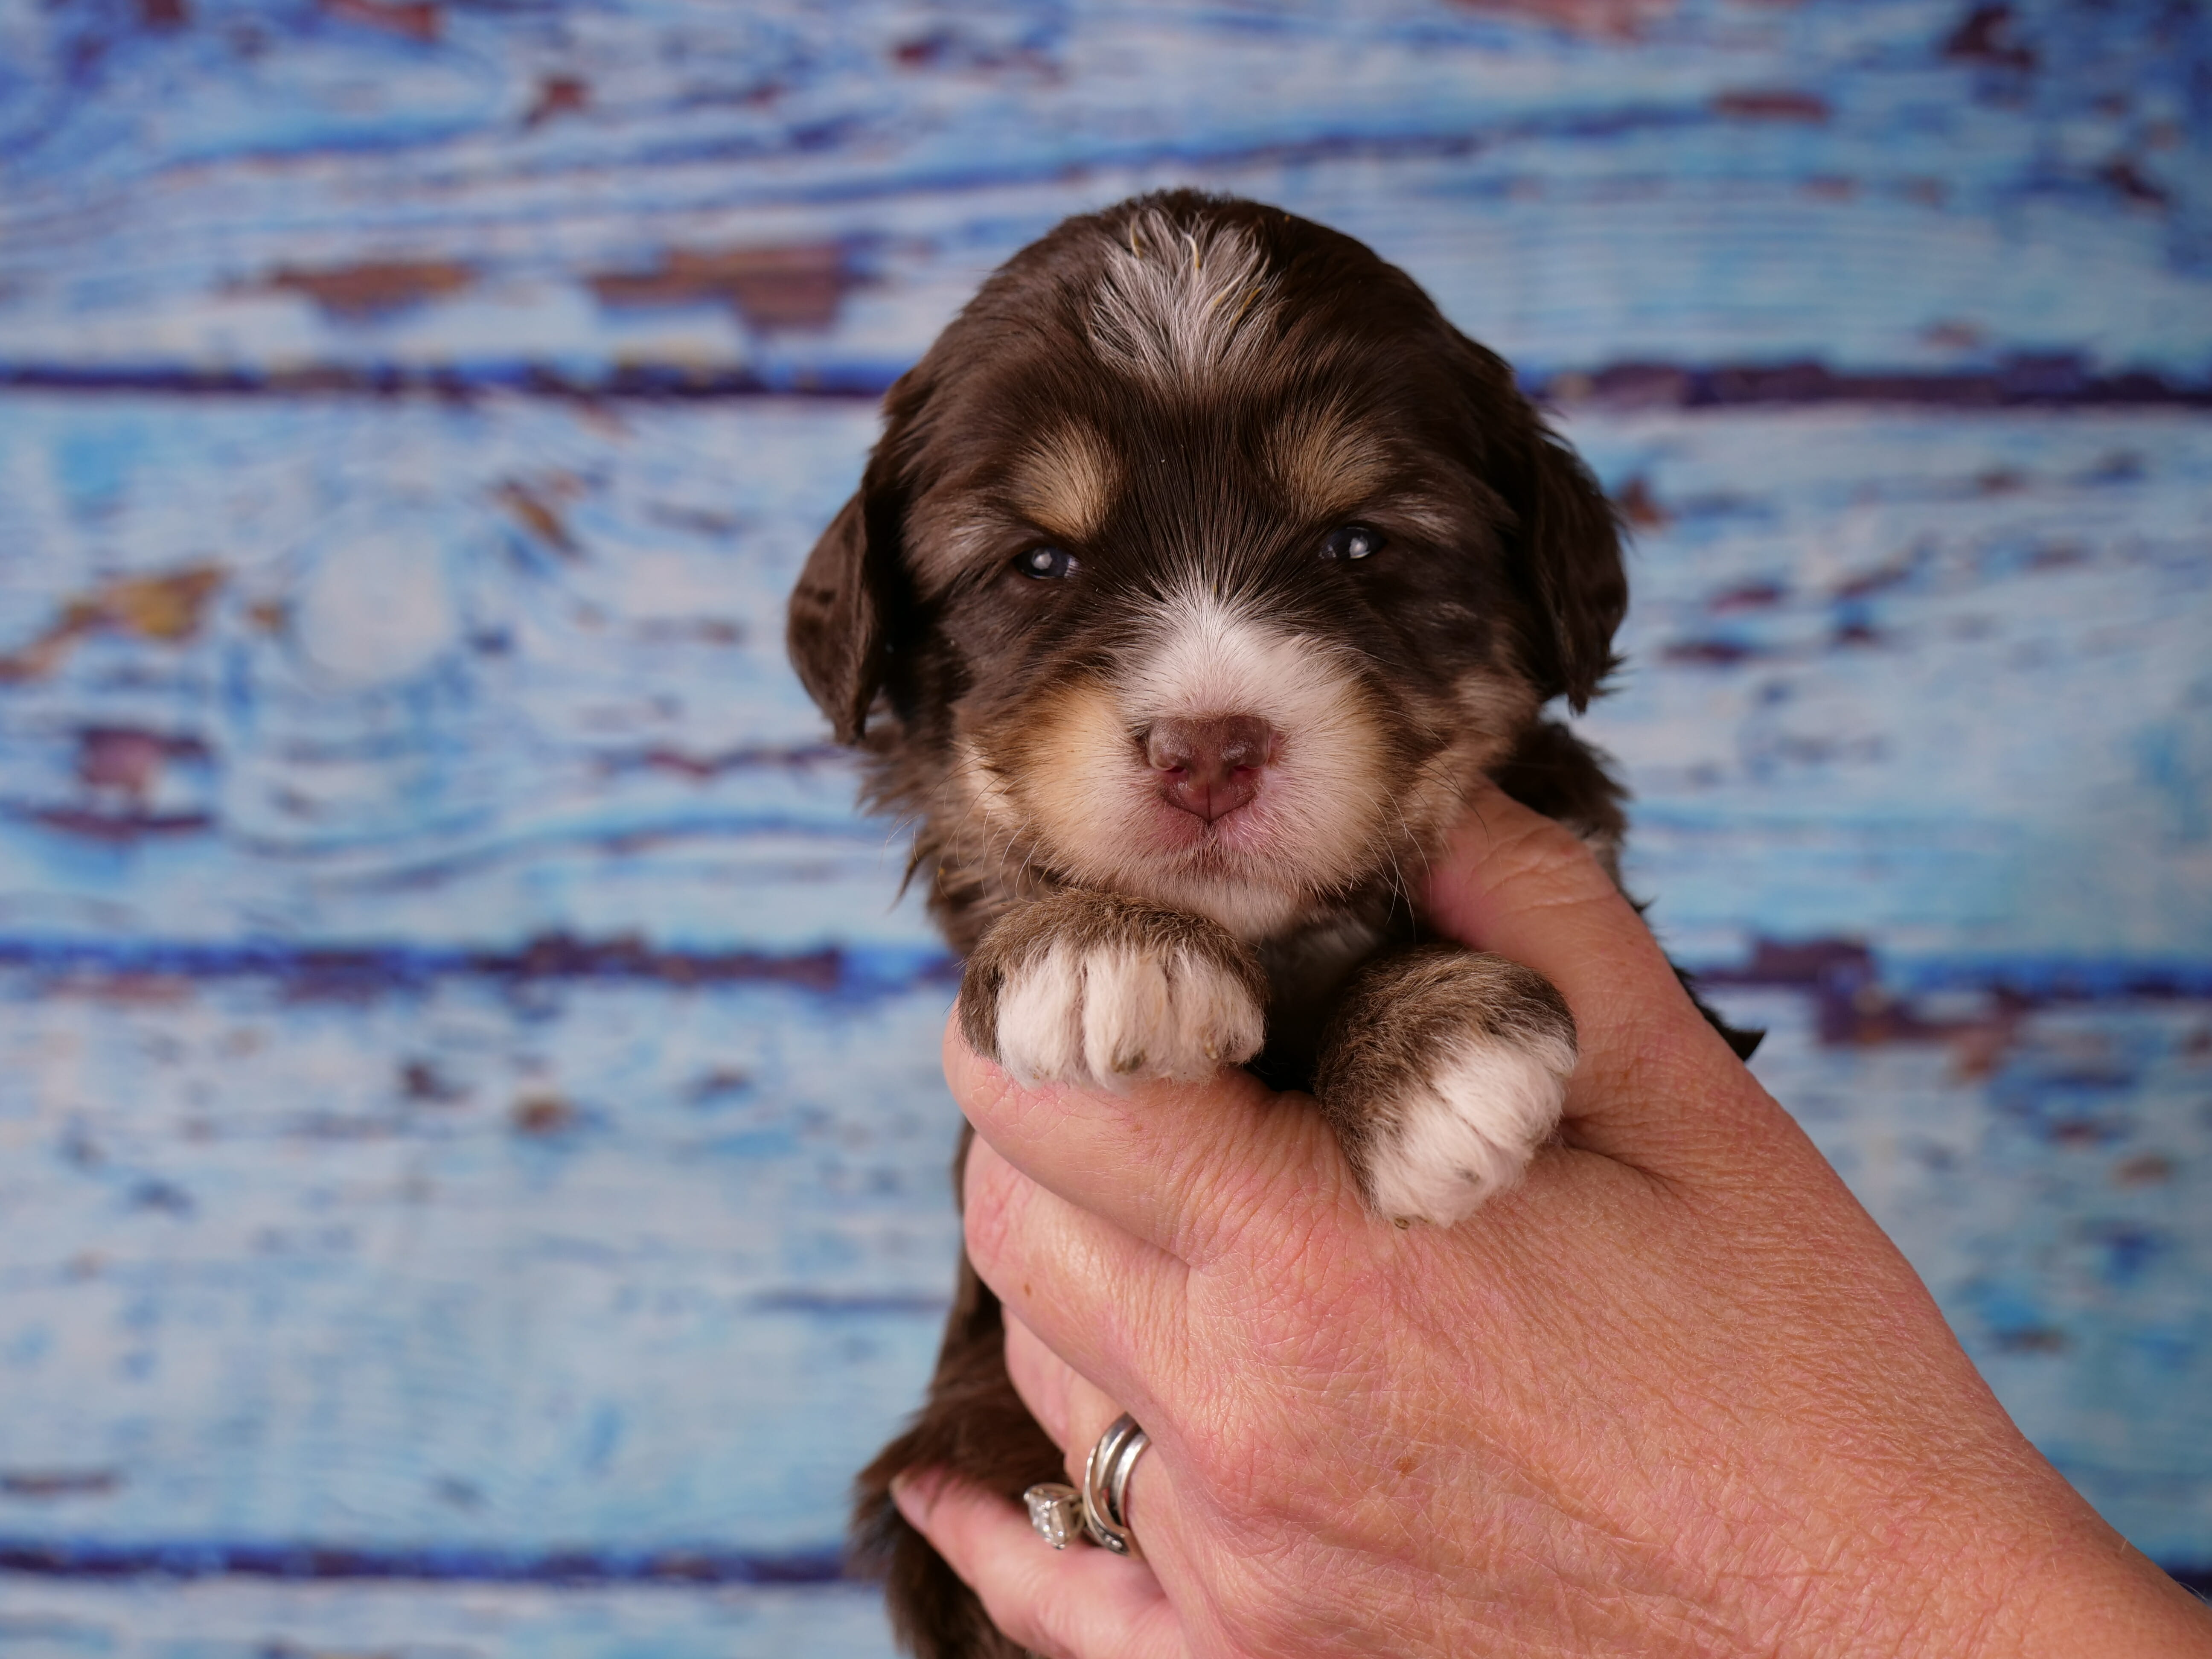 Chocolate phantom labradoodle puppy being held. Puppy is chocolate with copper markings and a white nose and legs.